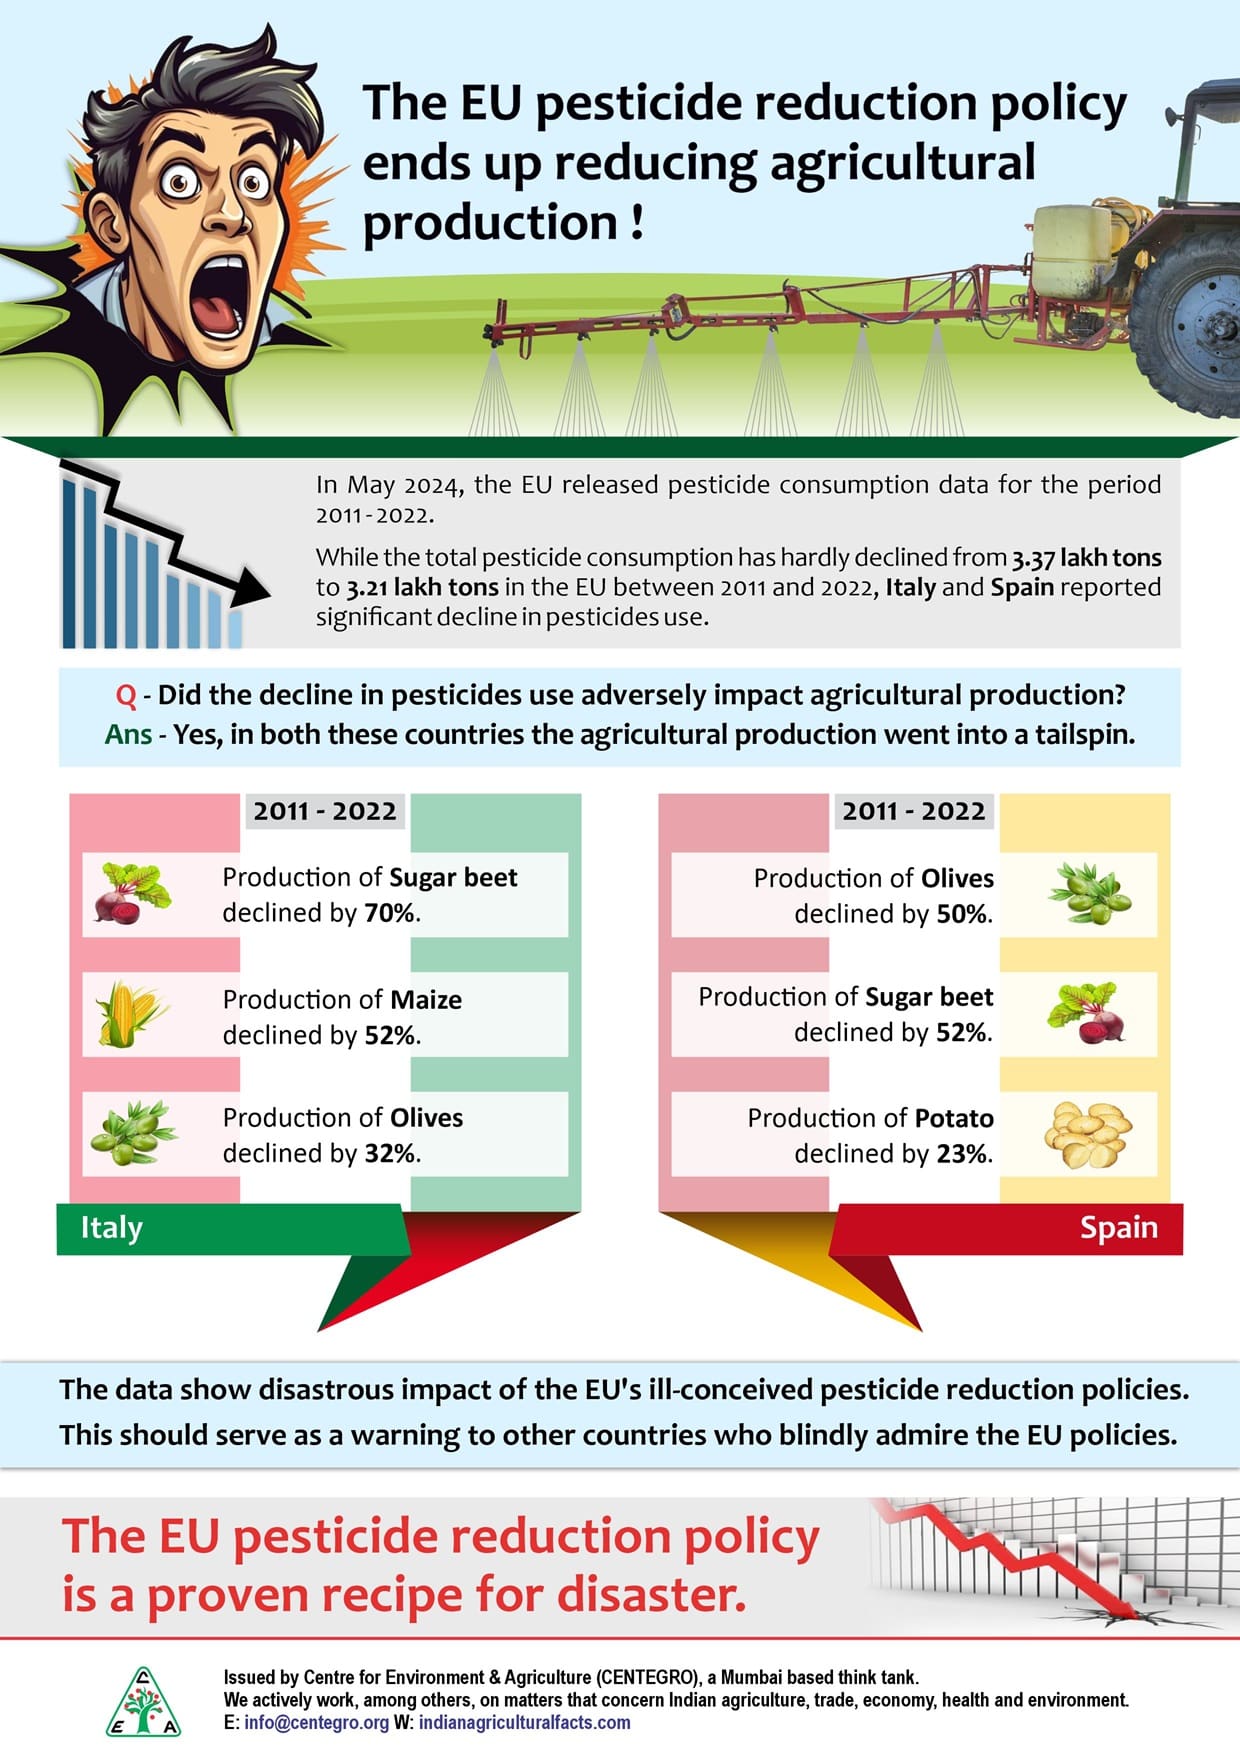 EU pesticide policy reducing agricultural production